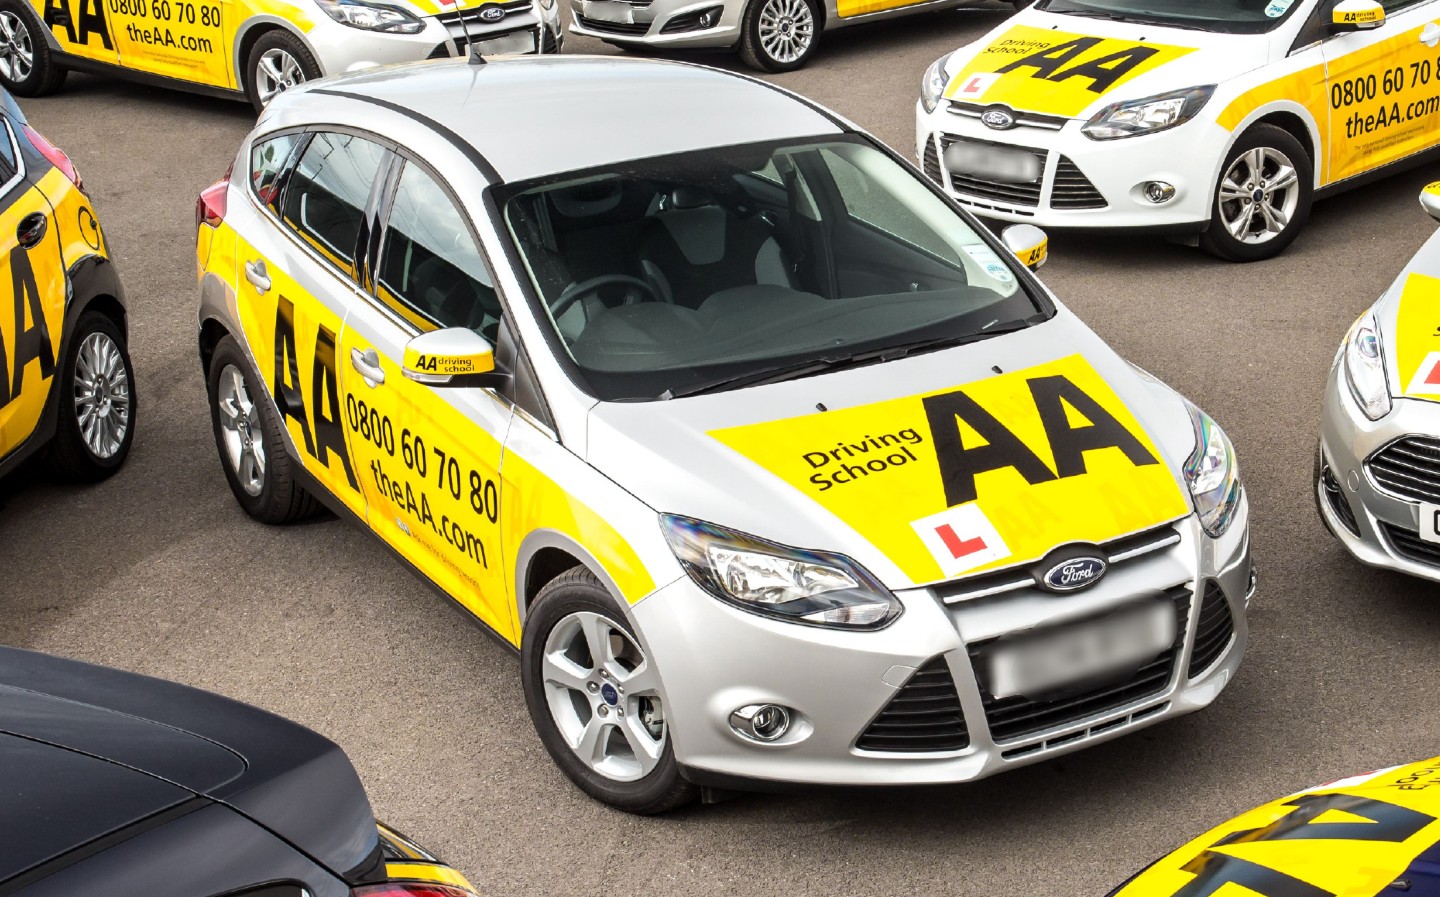 AA driving instructors suffering ‘anxiety and debt’ over franchise payments during lockdown